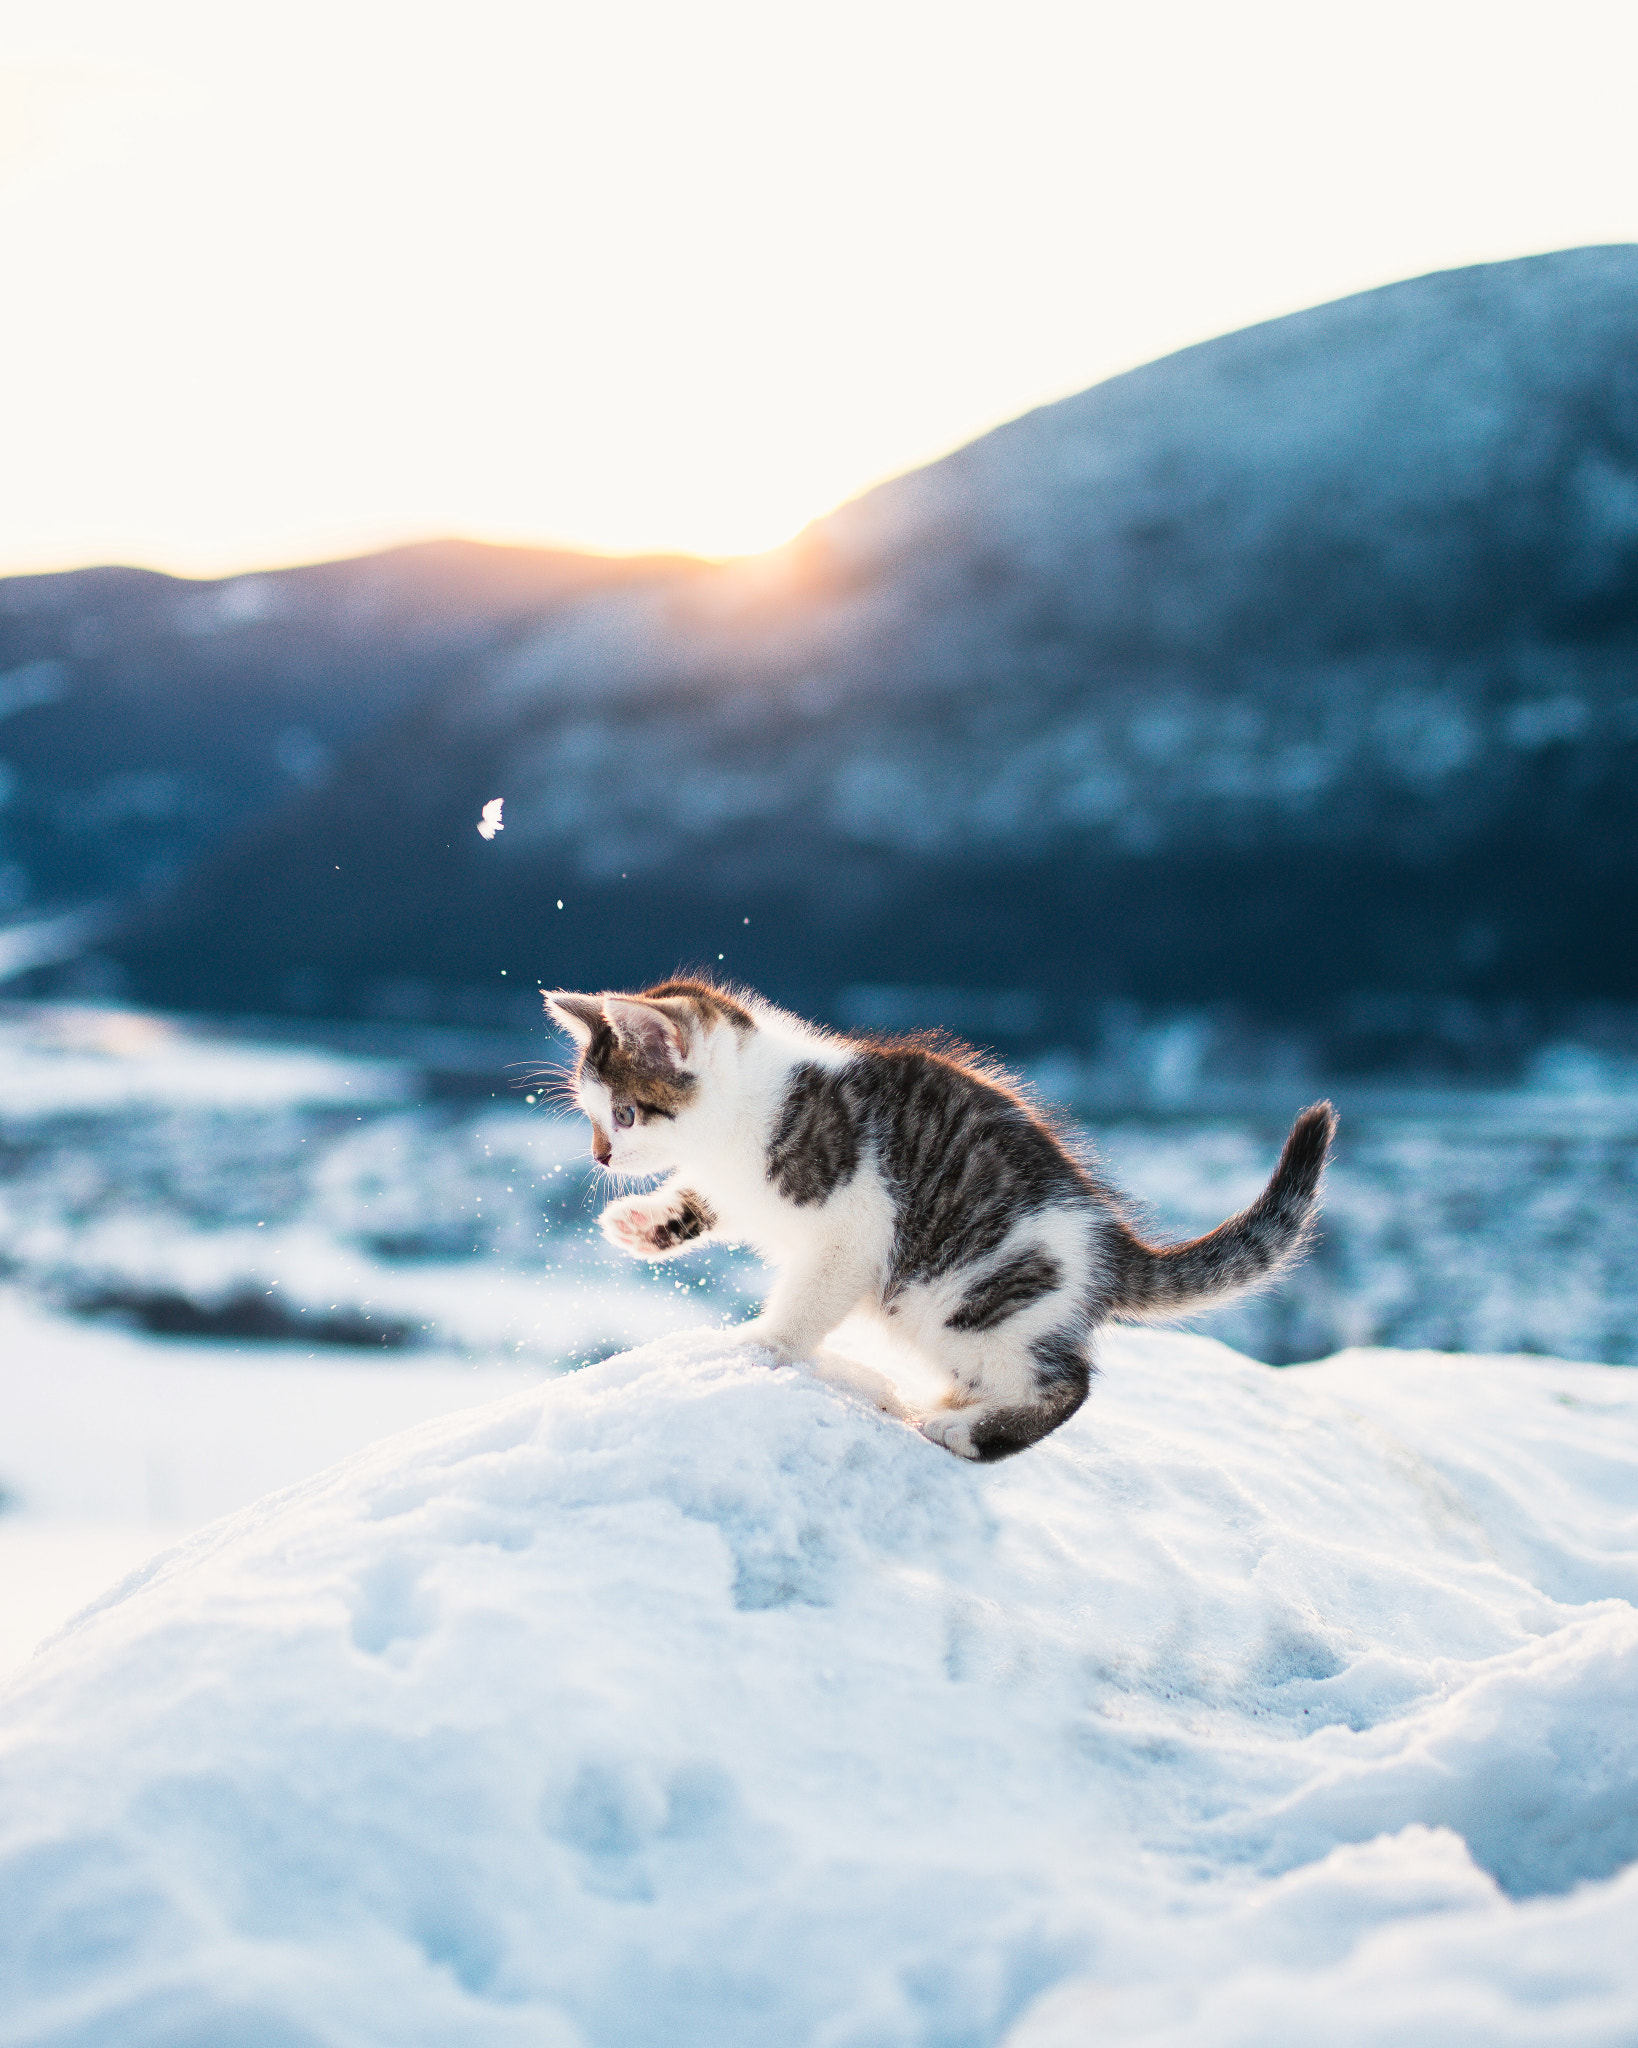 Sony a7R II + Sigma 35mm F1.4 DG HSM Art sample photo. Starting the year by playing with kittens in the snow, 2017 is off to a great start! photography